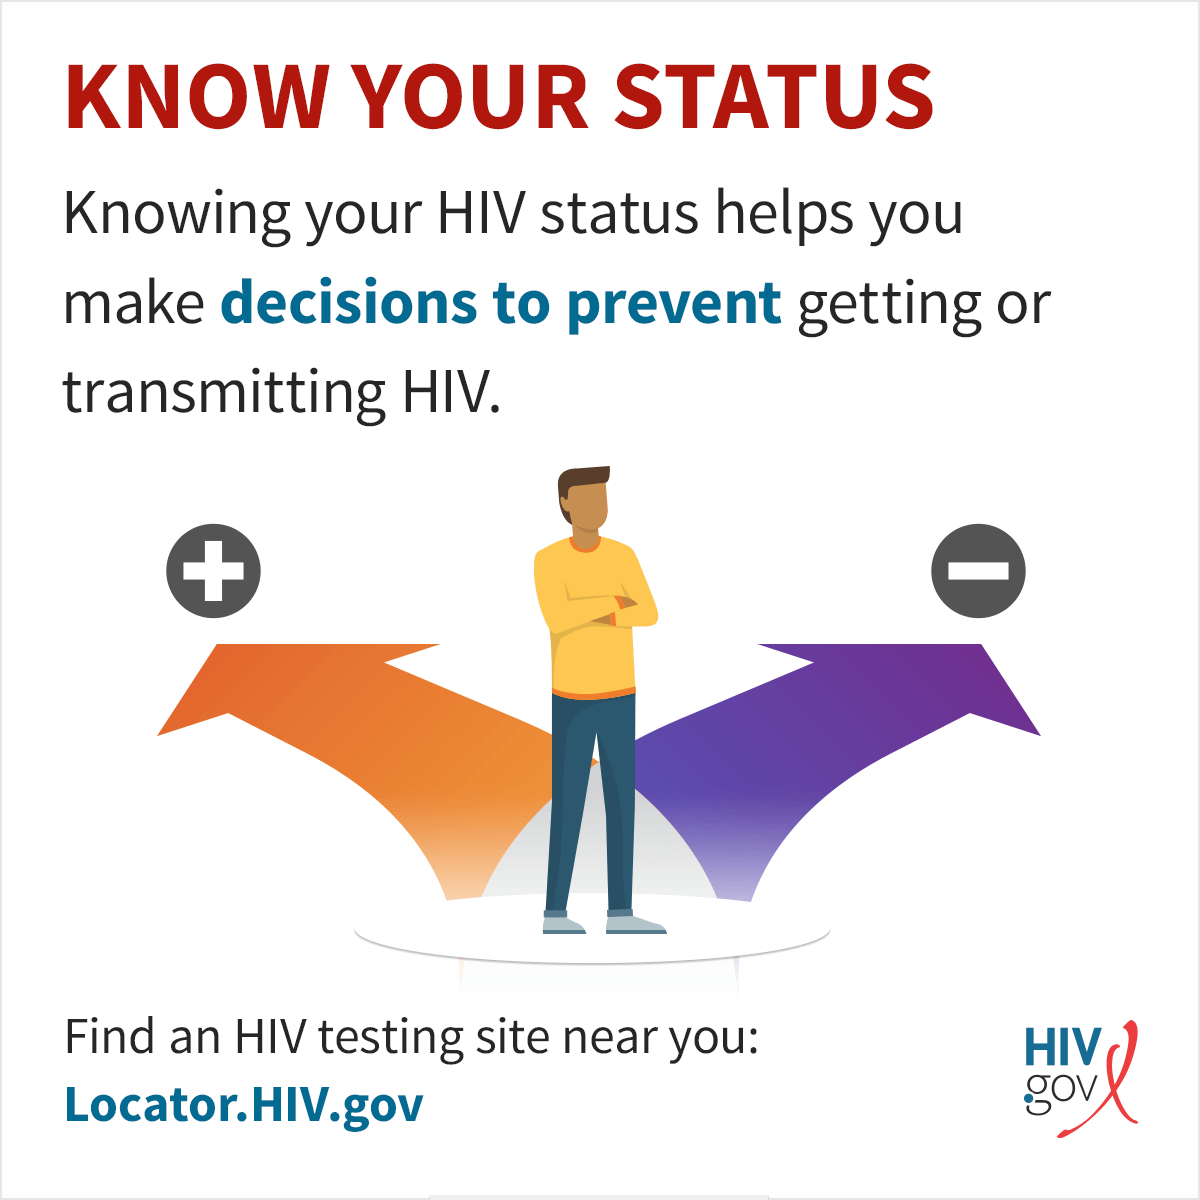 Knowing your HIV status helps you make decisions to prevent getting or transmitting HIV.